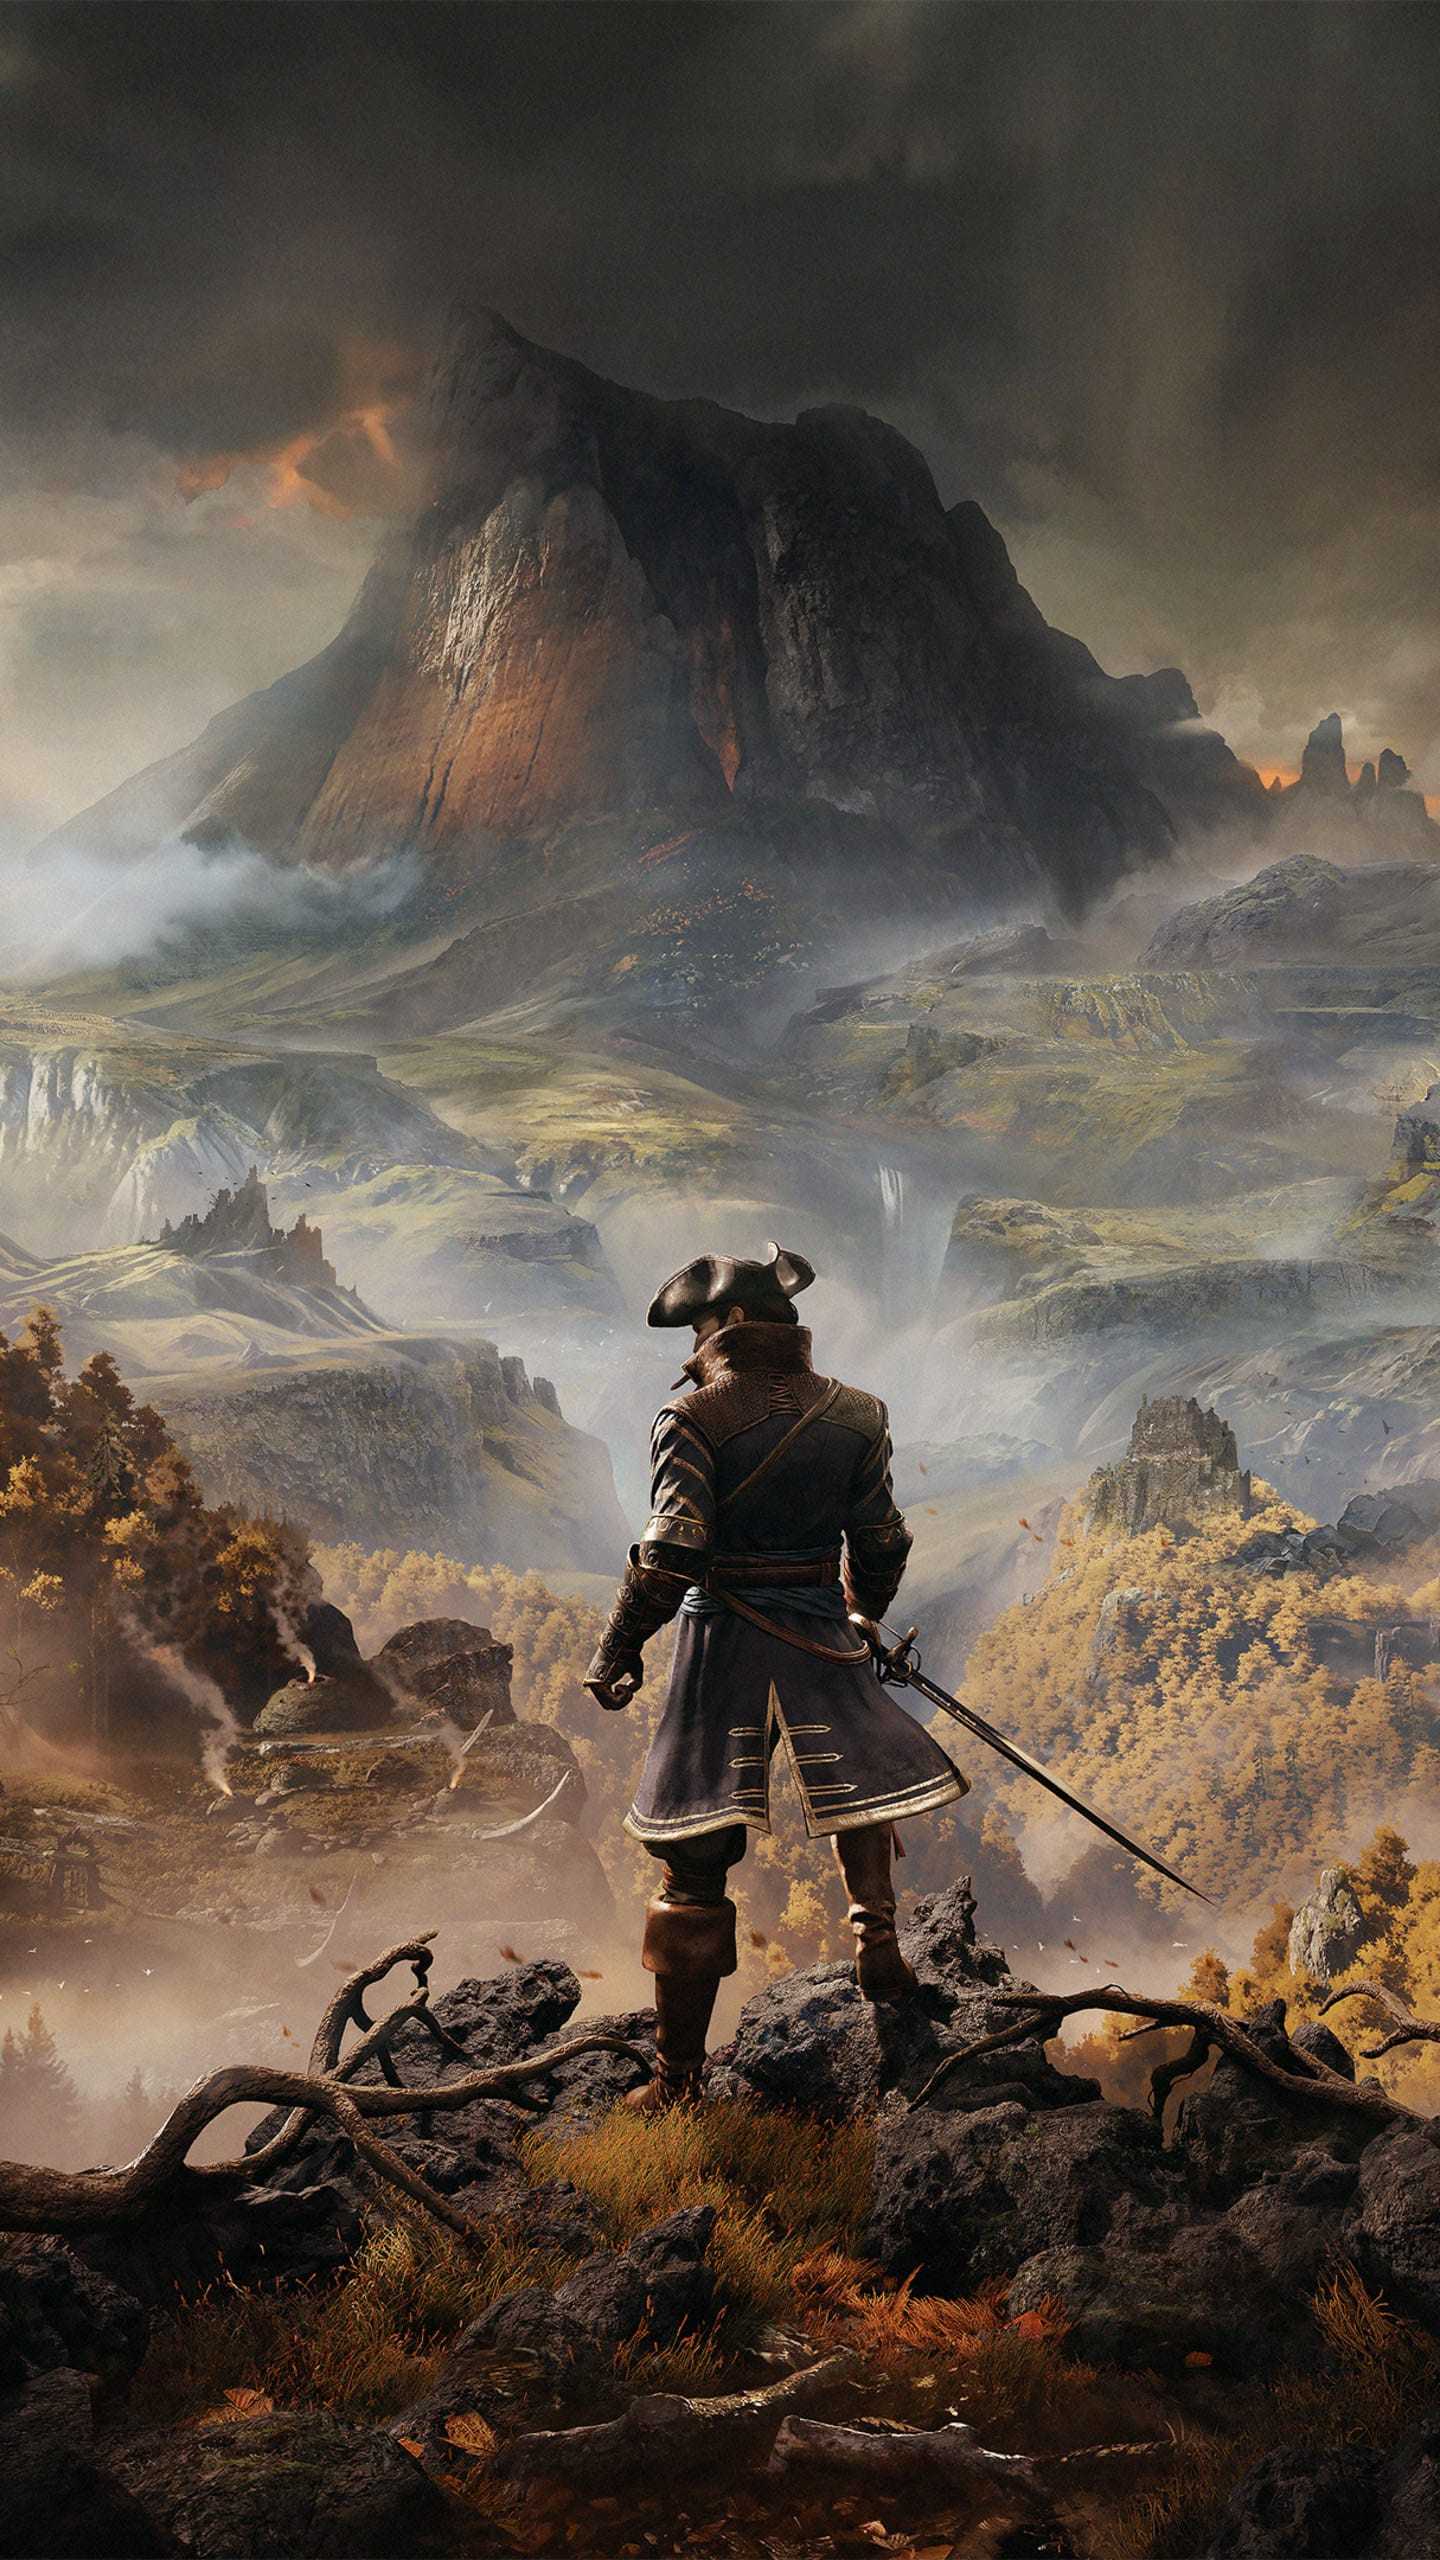 android greedfall backgrounds